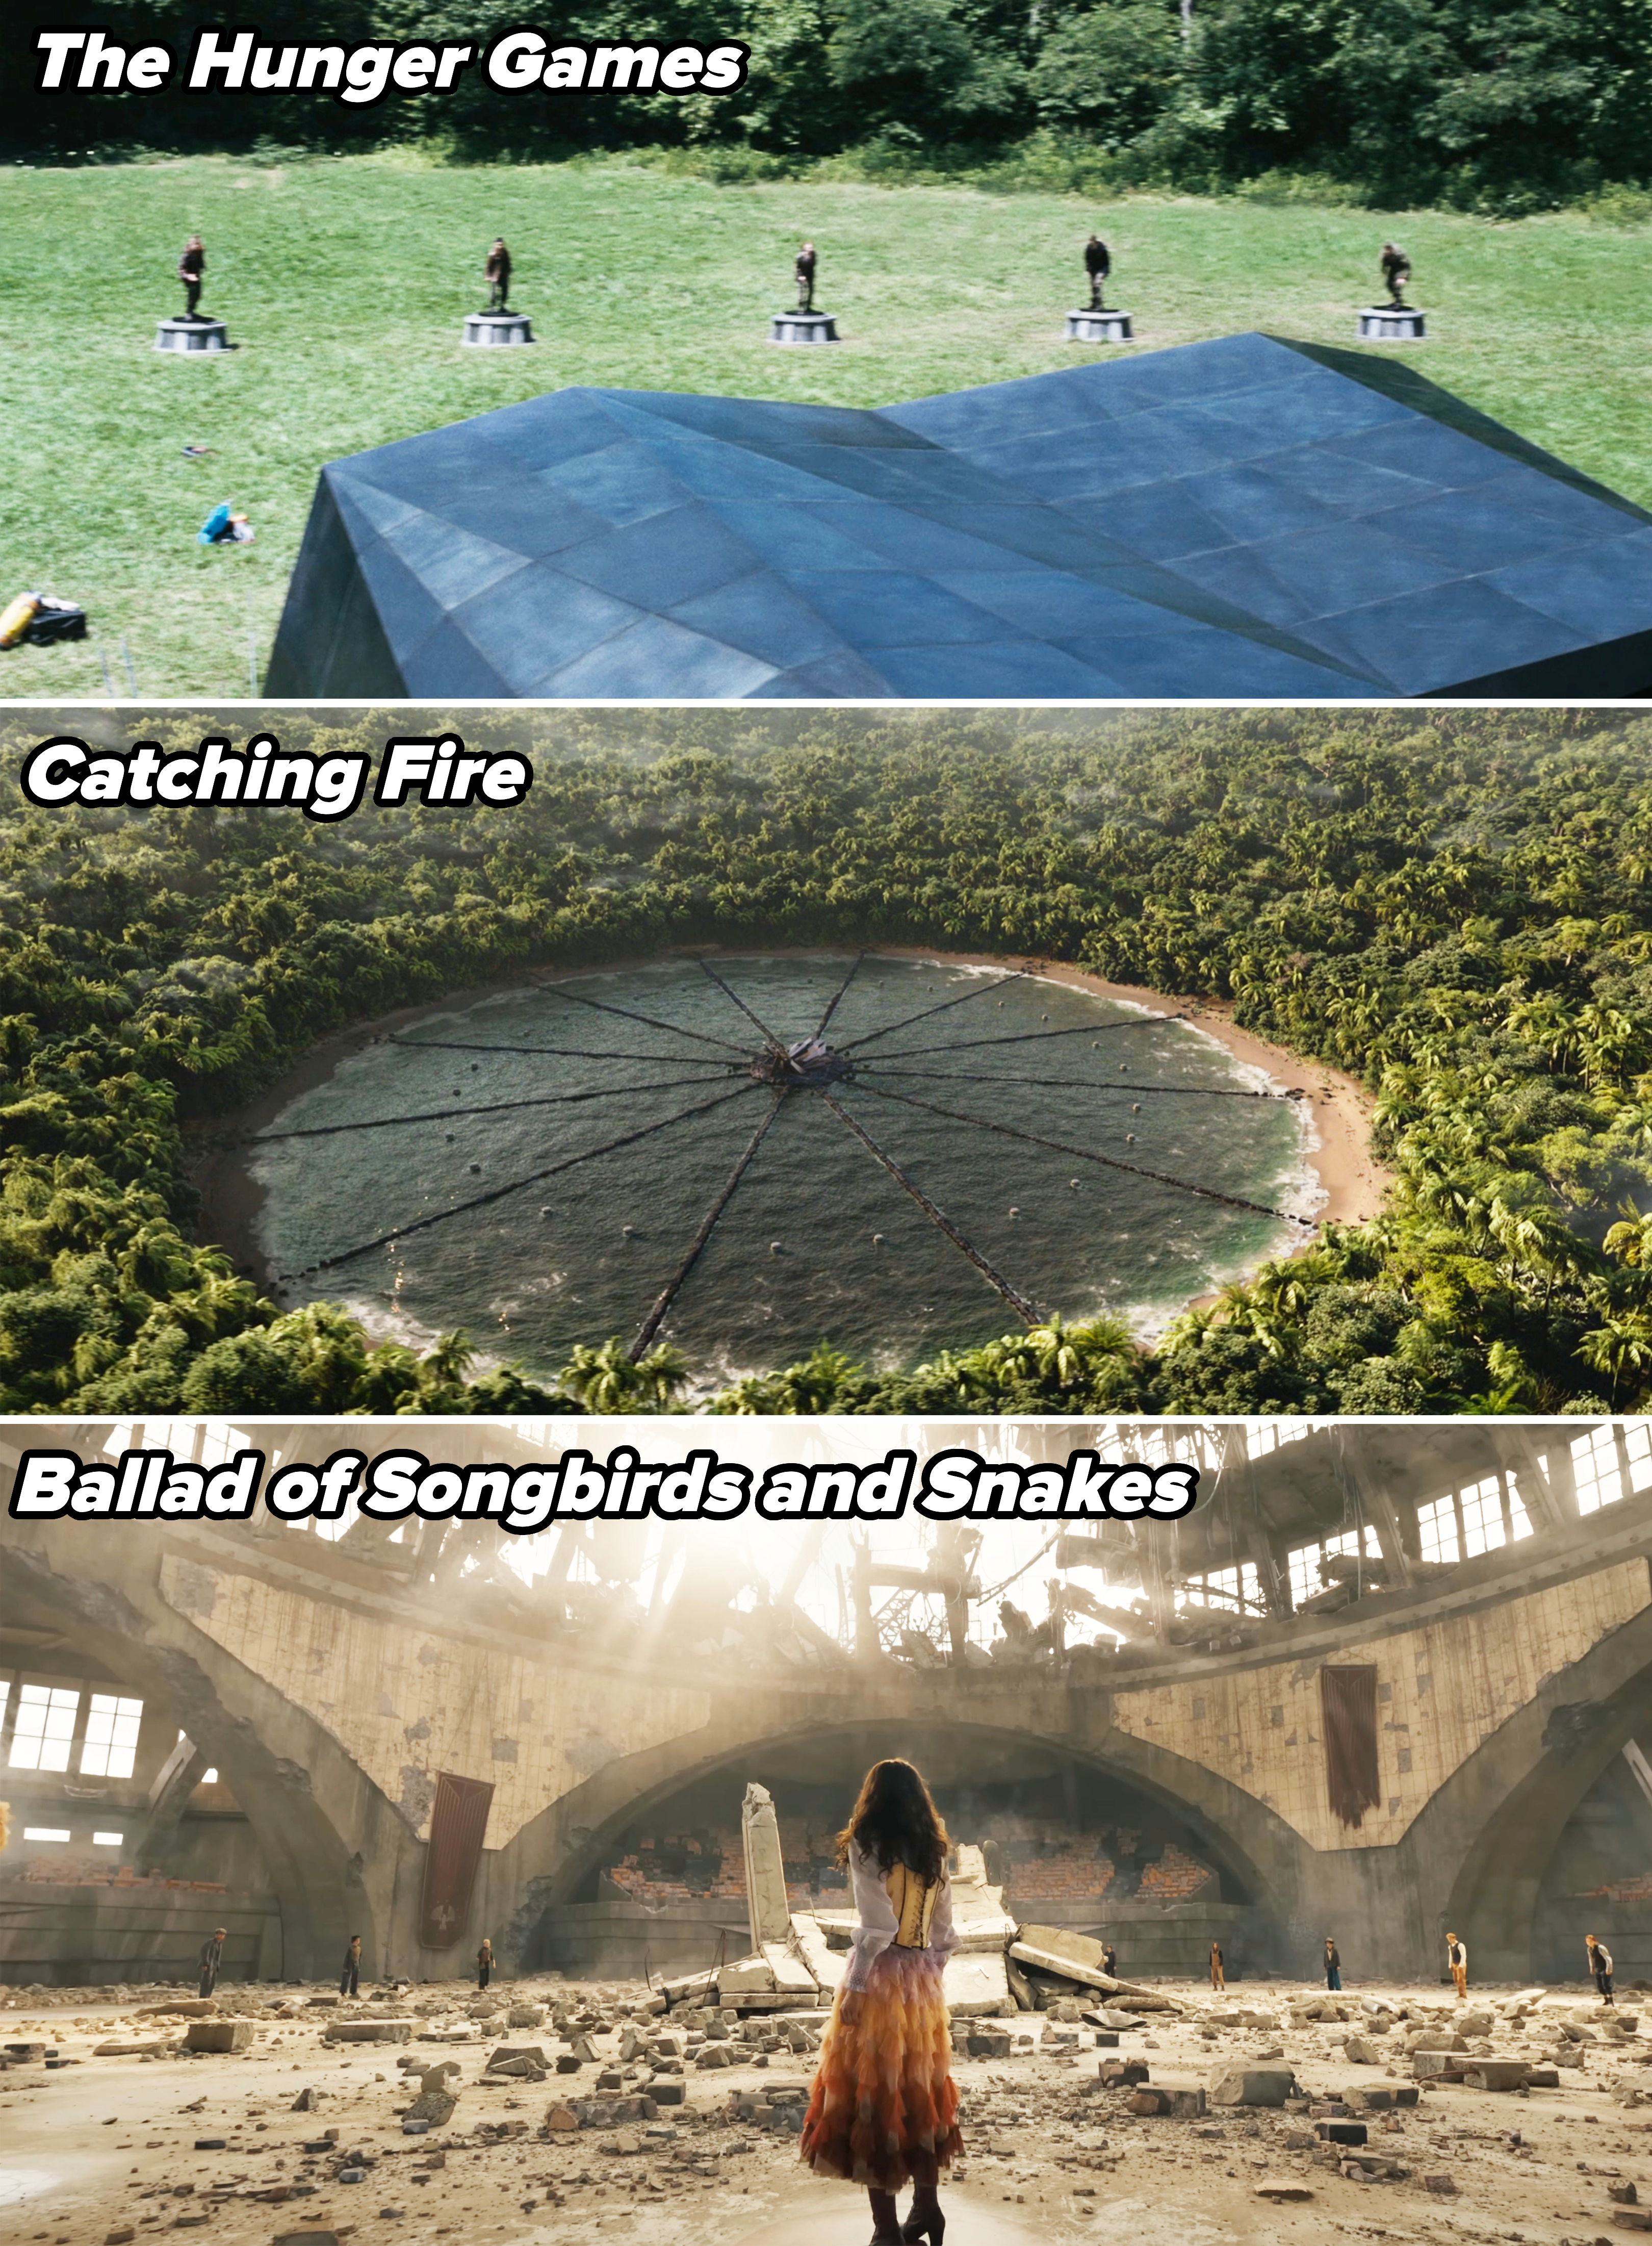 the different arenas and games locations